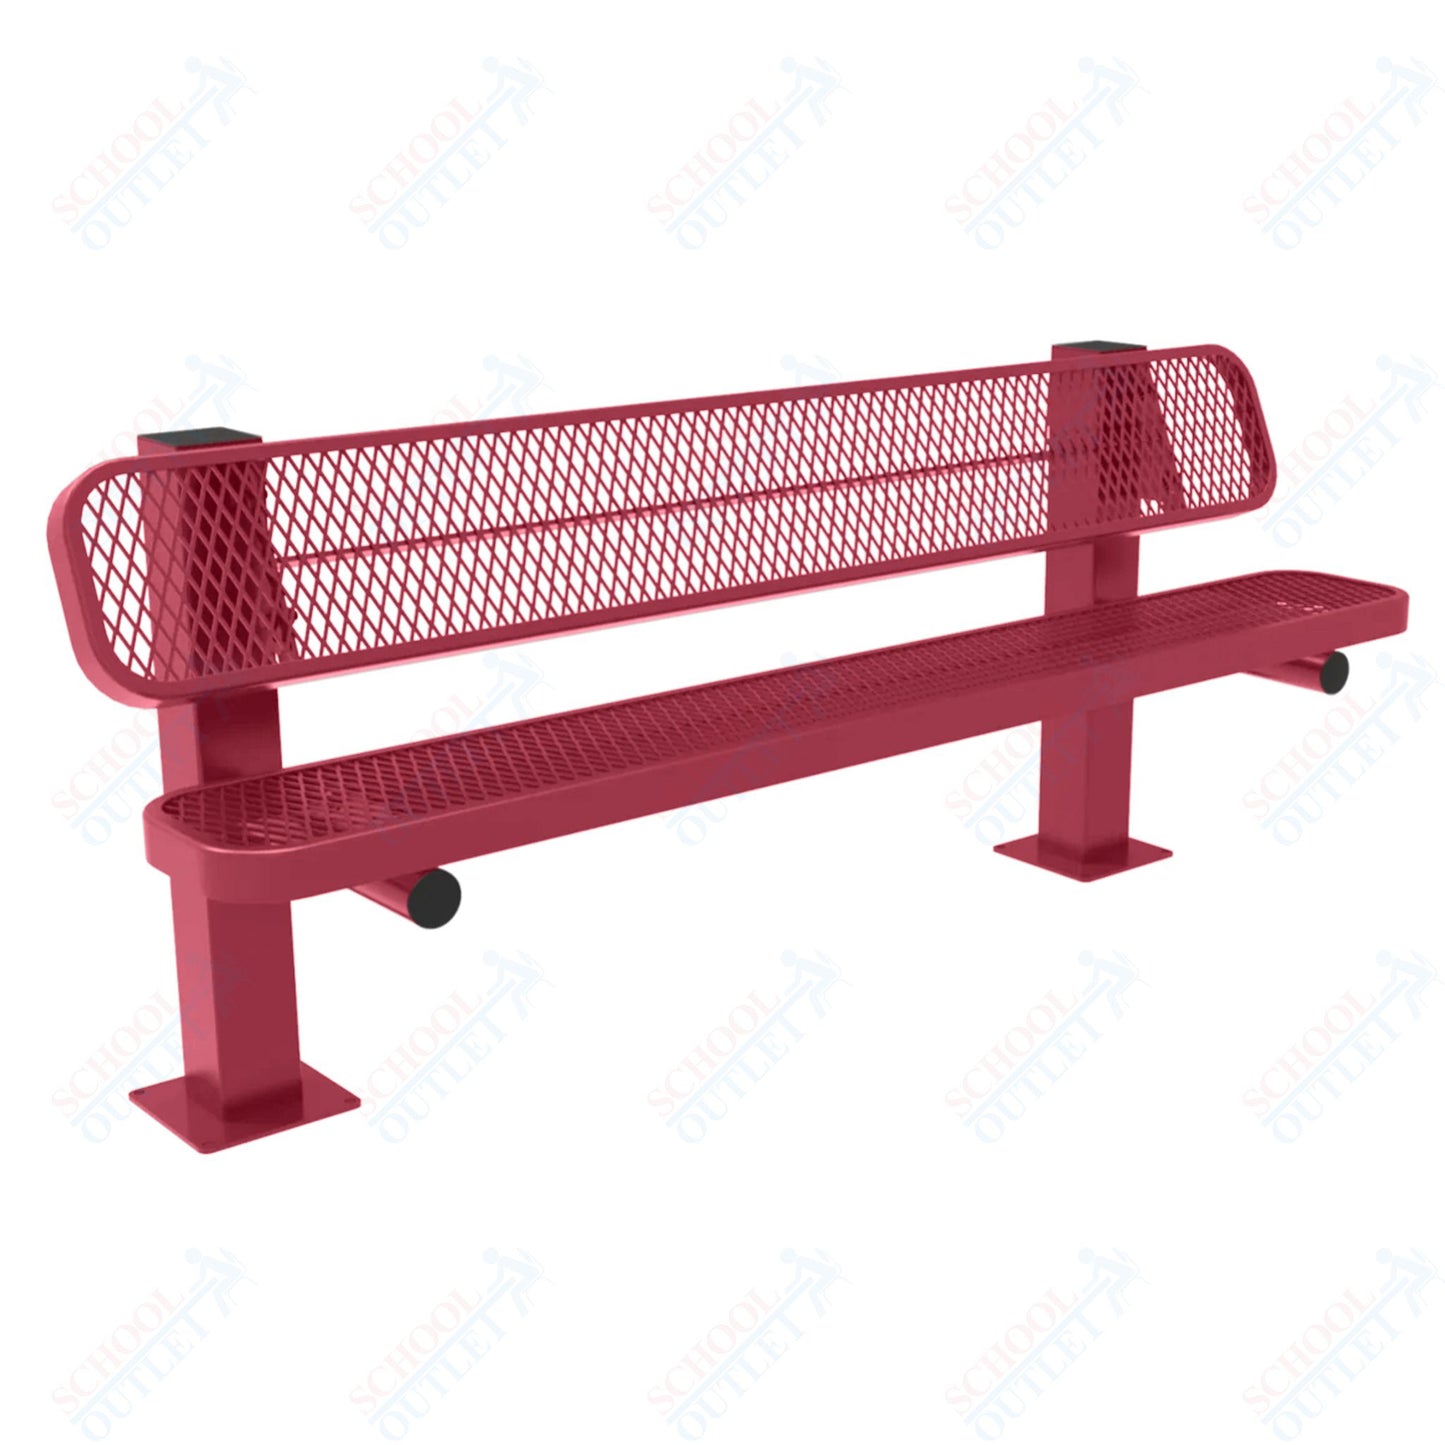 MyTcoat - Single Pedstal Outdoor Bench with Back - Surface Mount 6' L (MYT-BRT06-62)